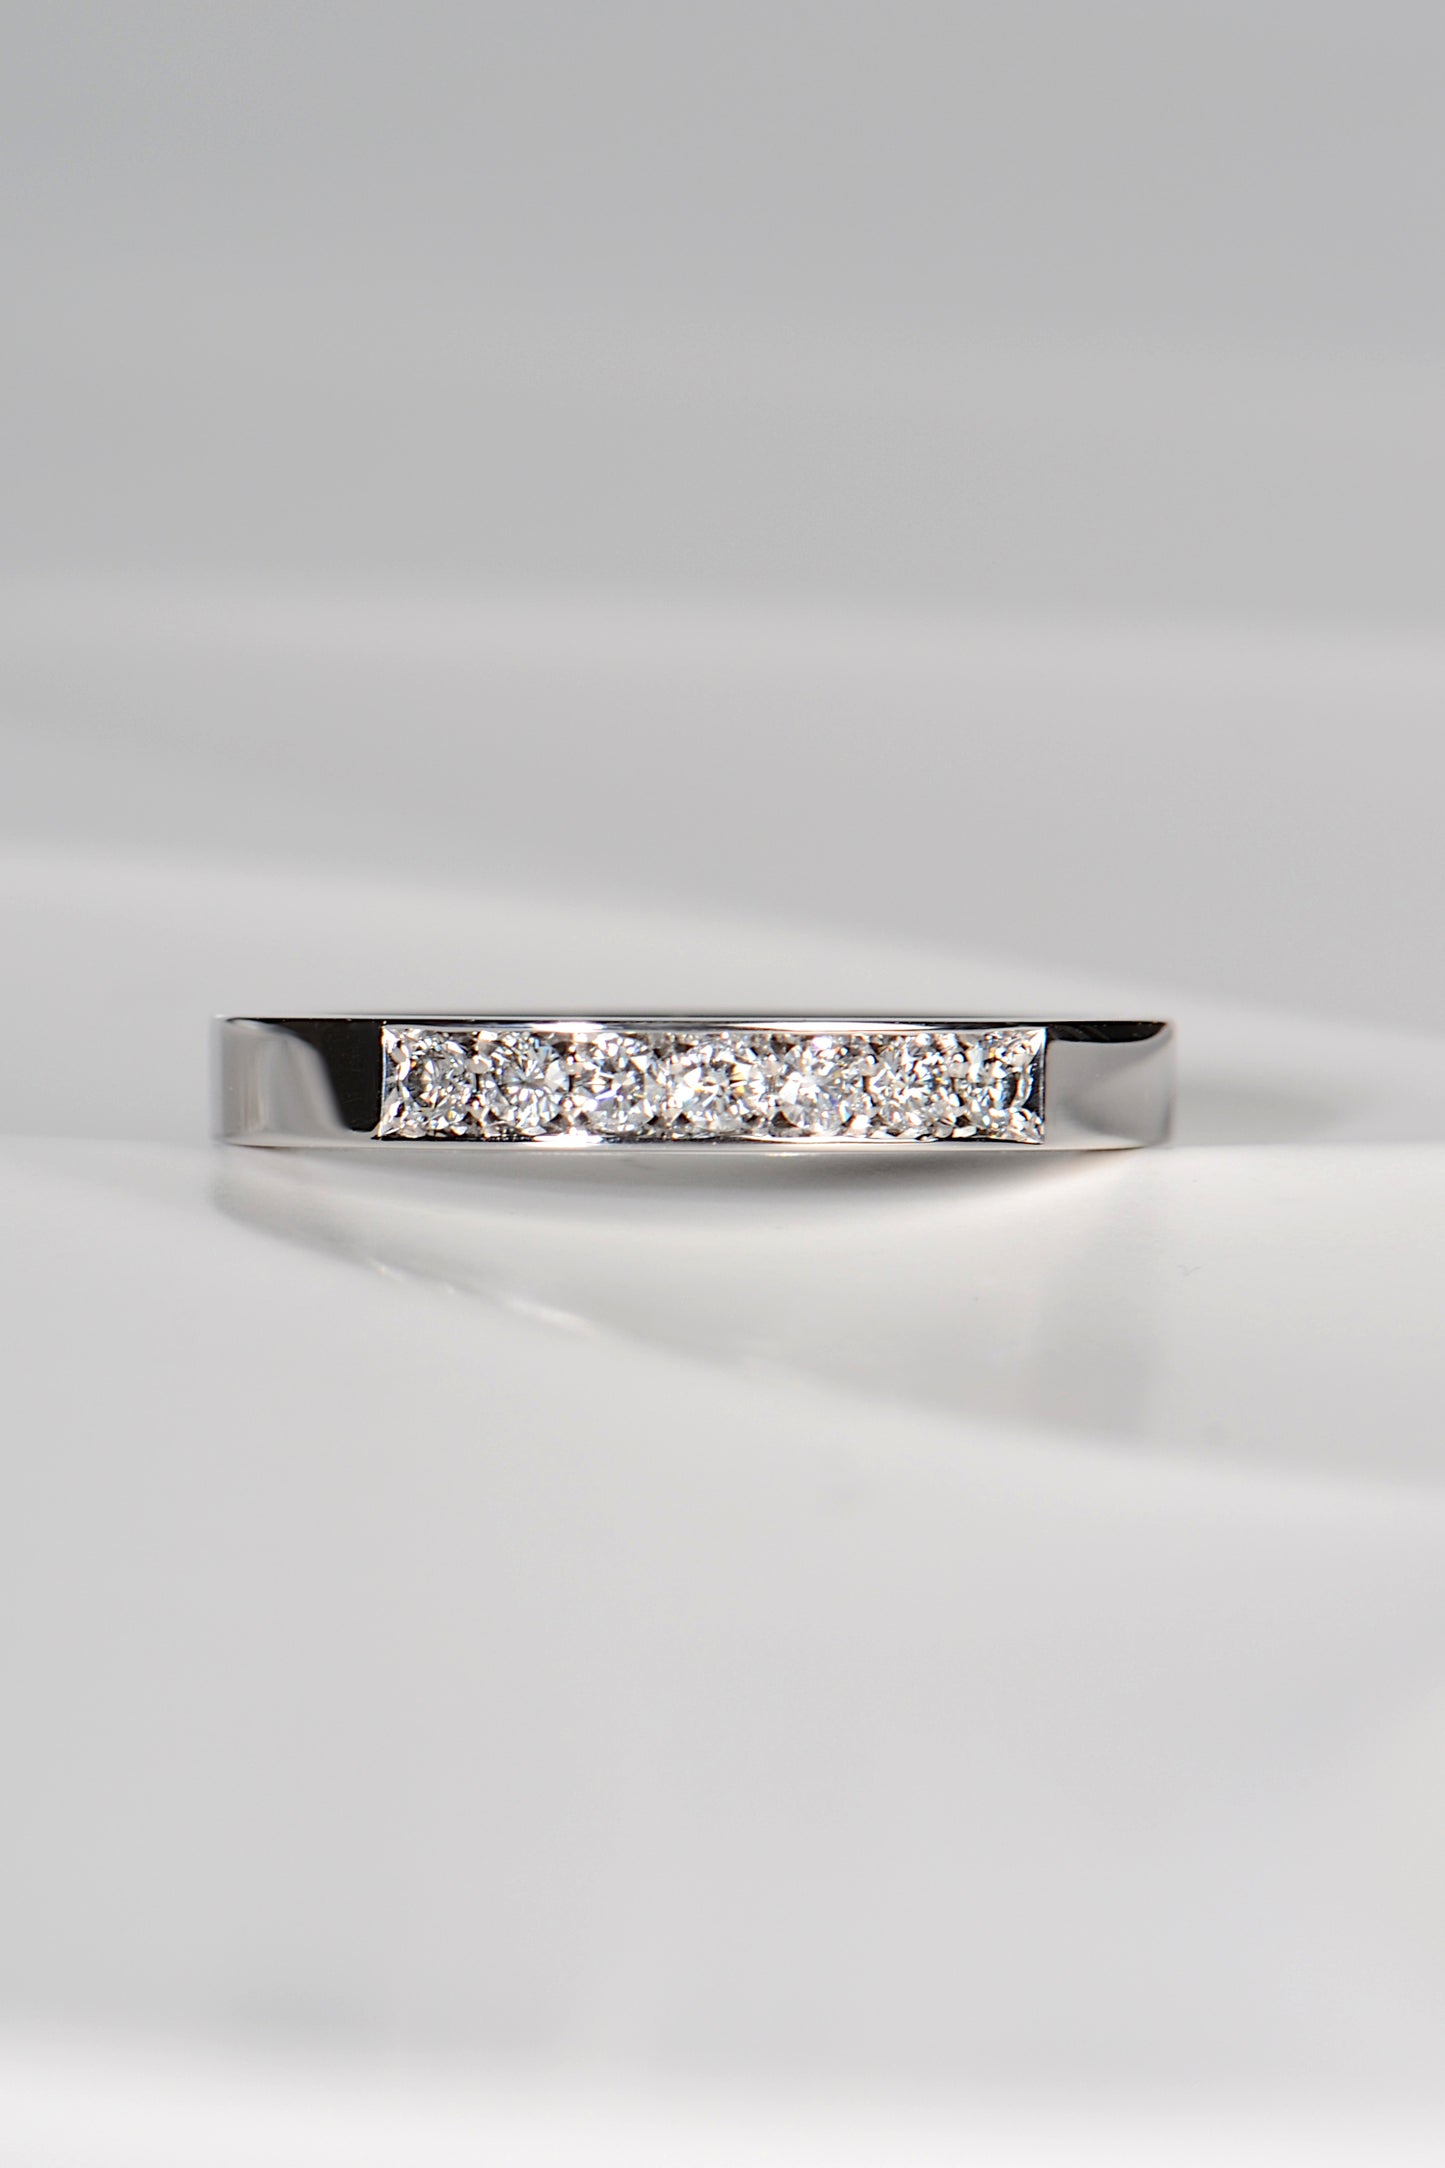 3mm wide seven stone diamond ring made in UK